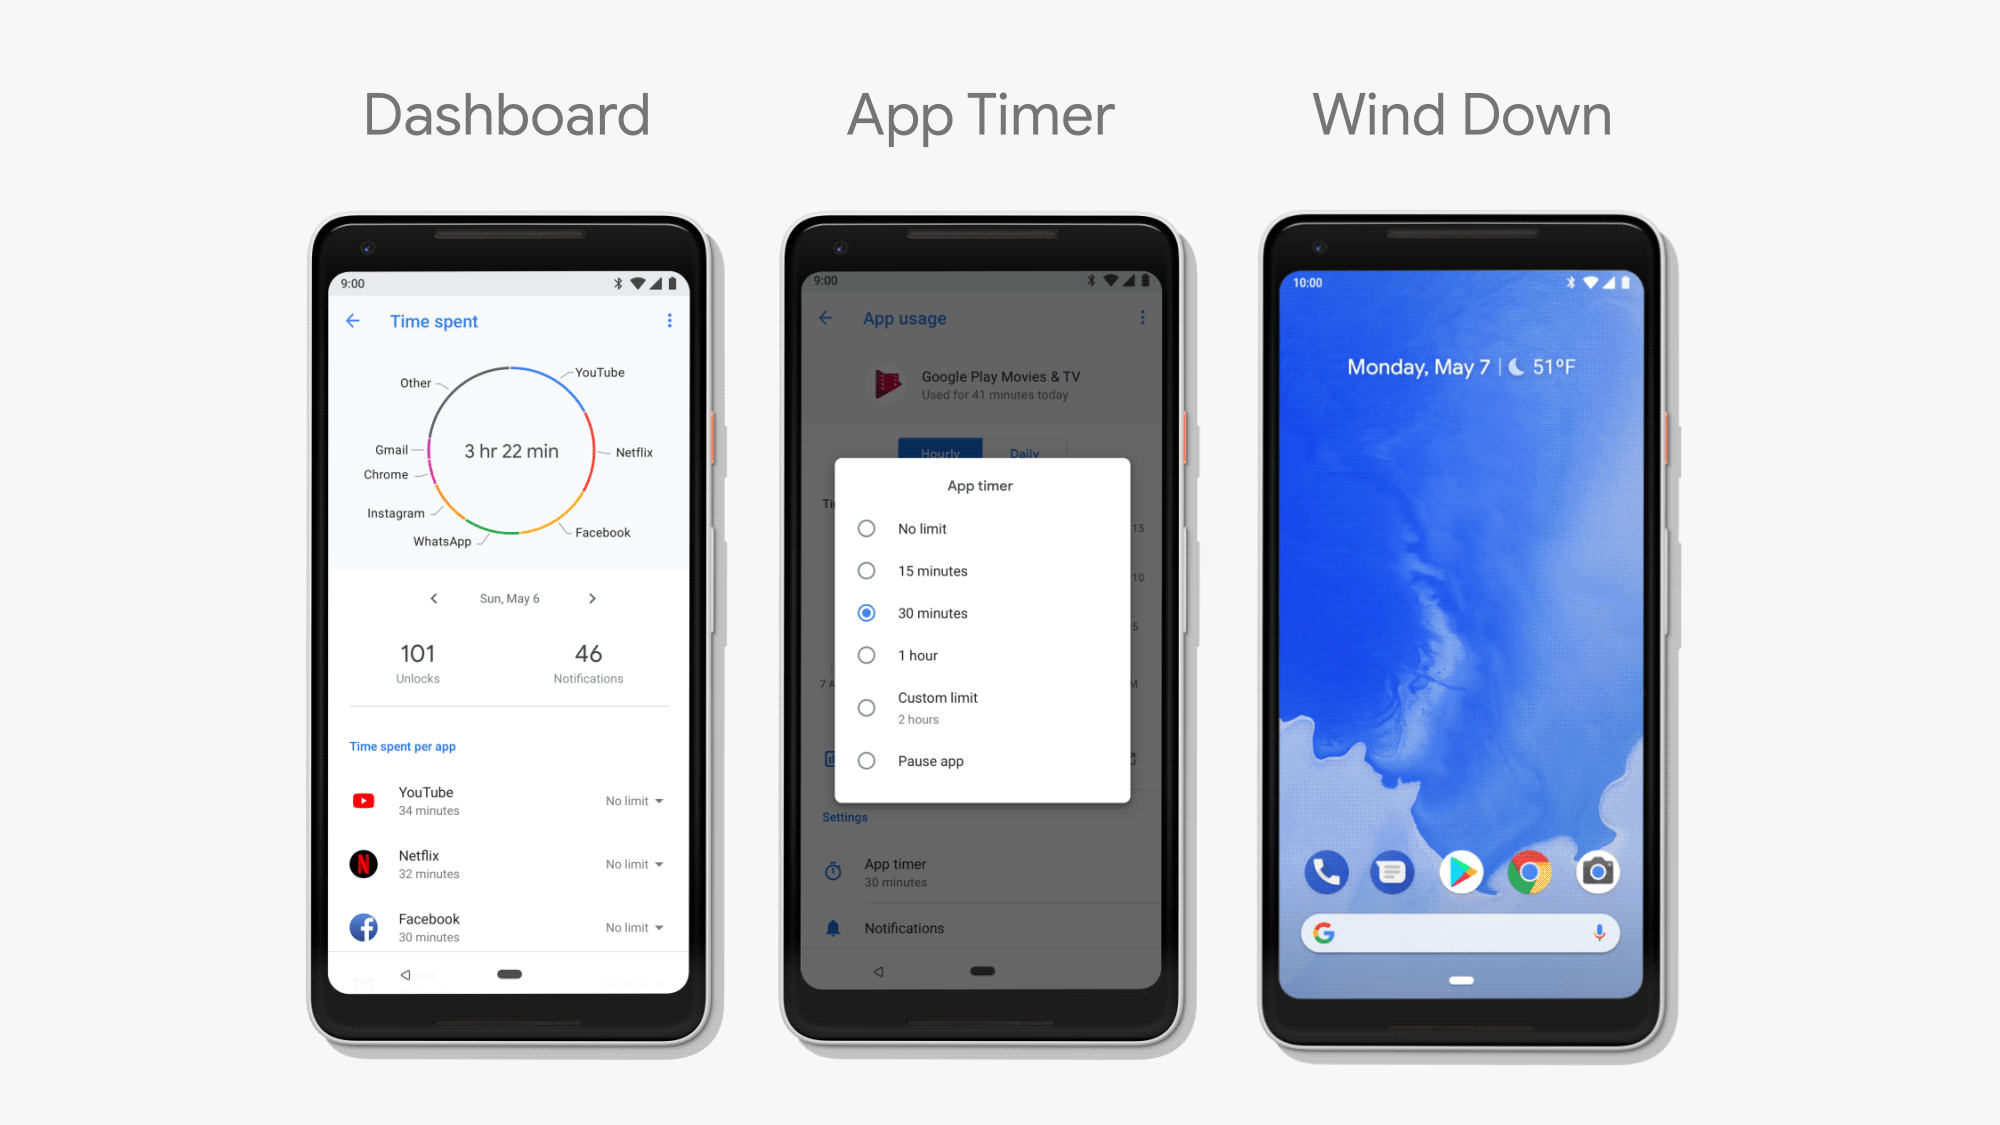 Android 9 Pie digital wellbeing